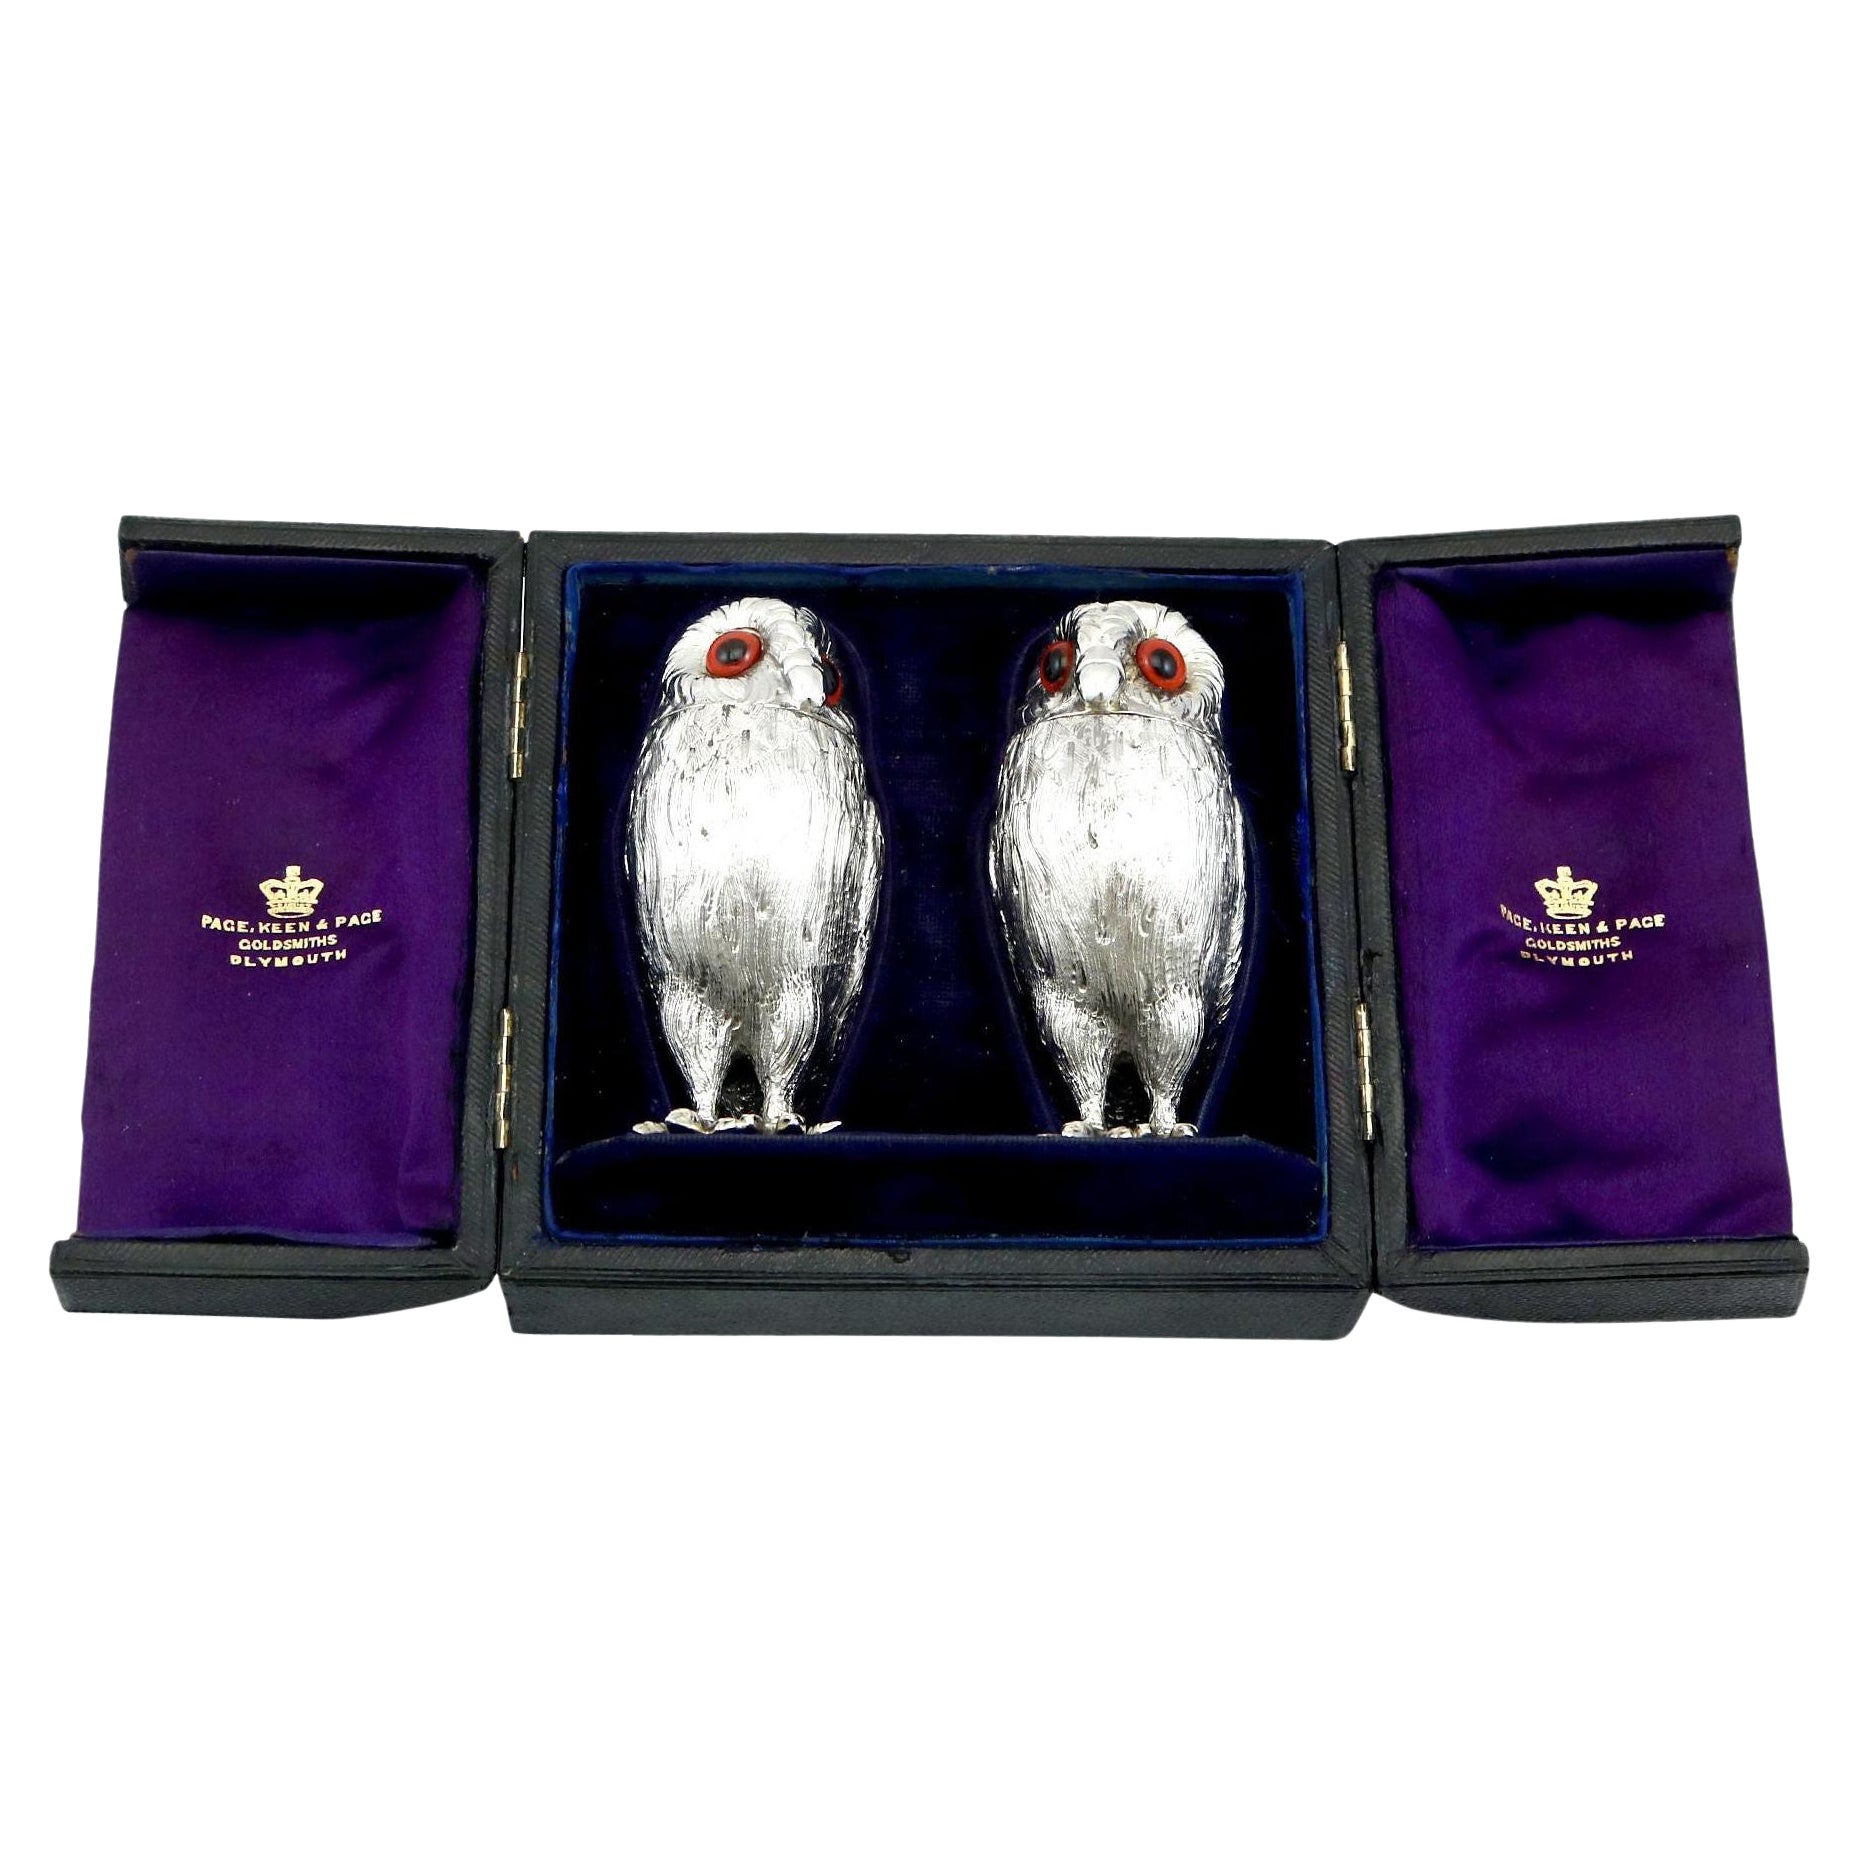 Antique Victorian Sterling Silver Owl Pepperettes